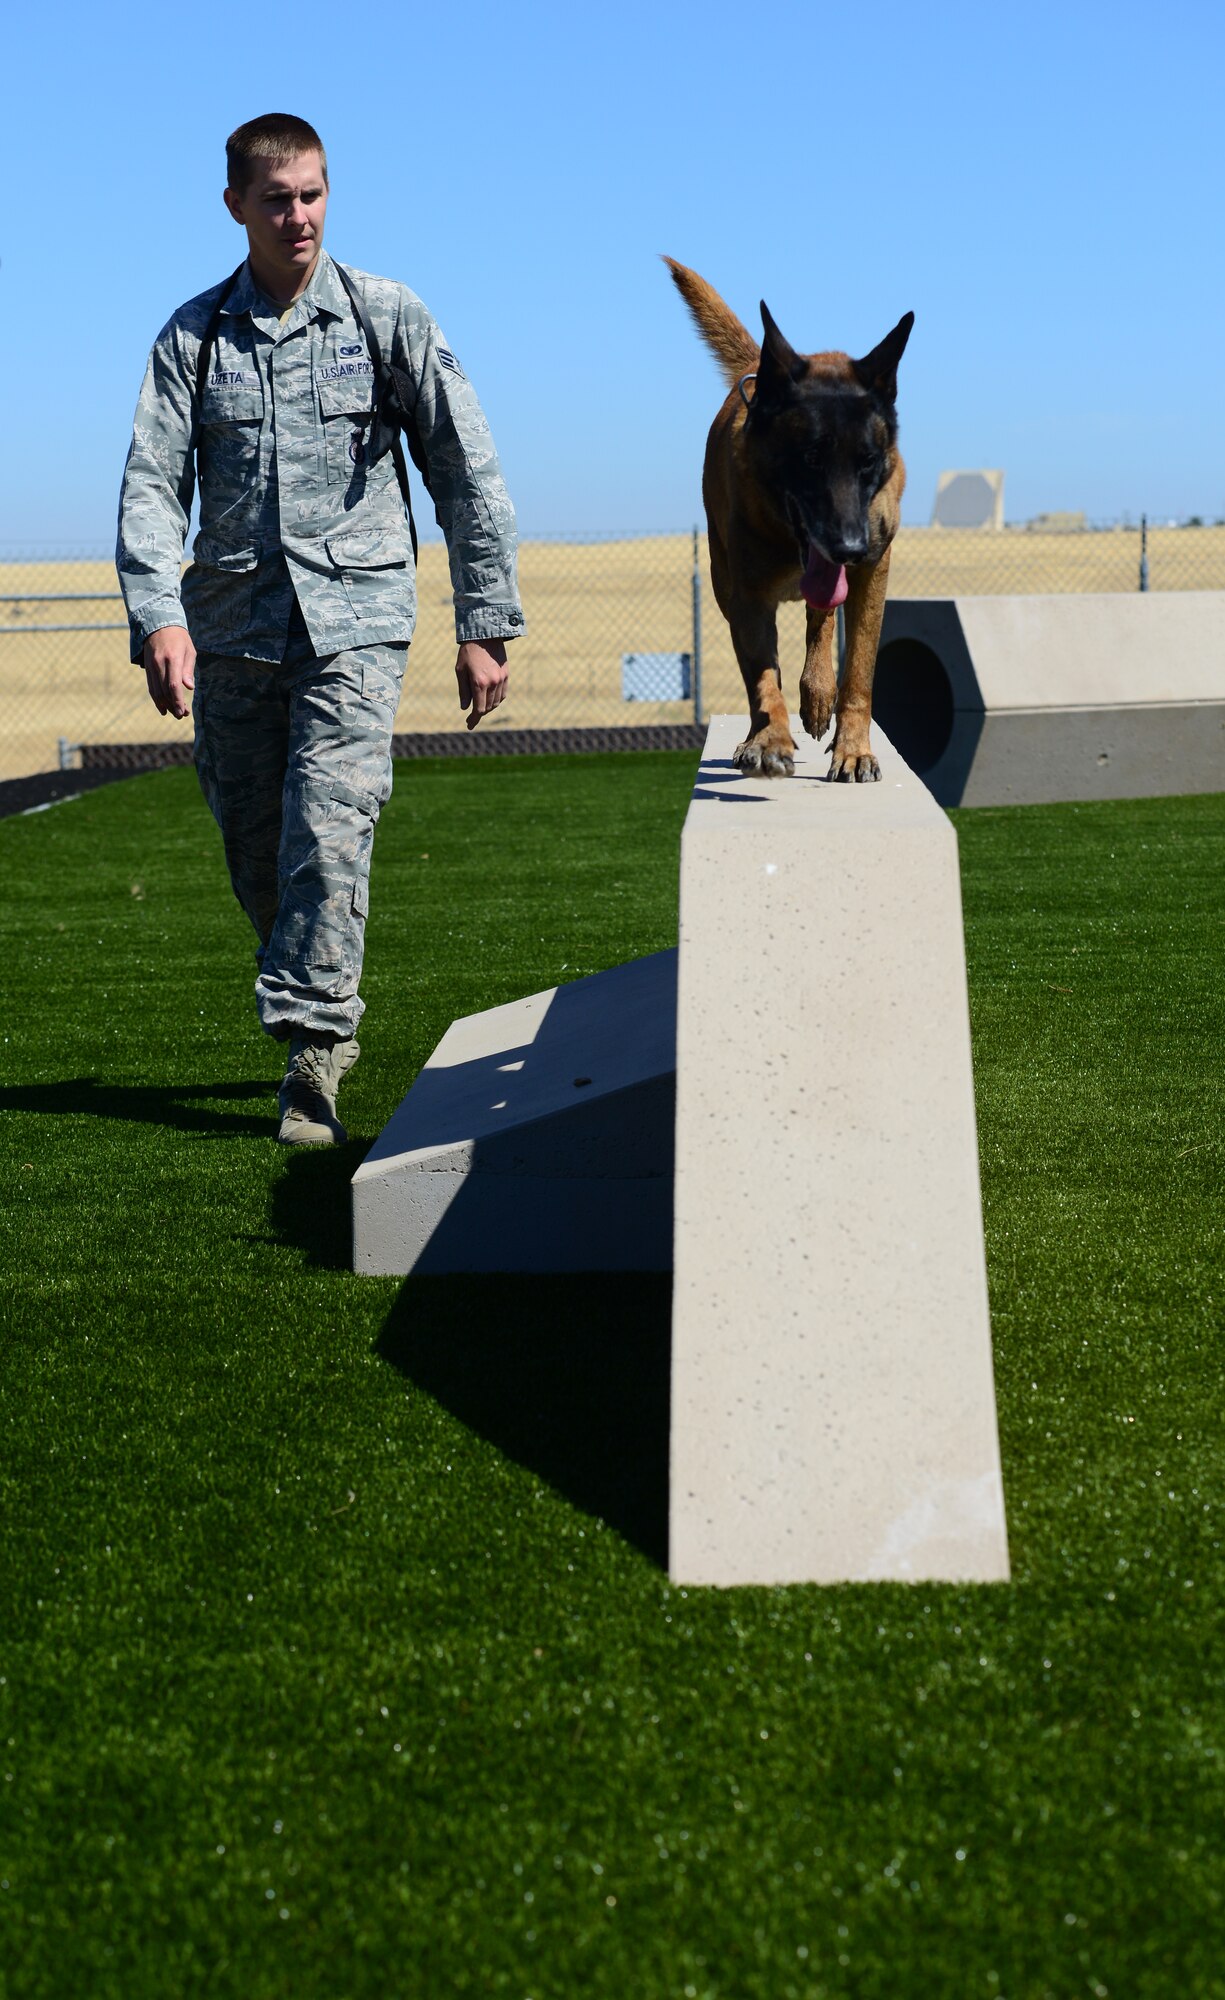 The 9th Security Forces Squadron military working dog unit recently completed a new training area designed to enhance the companionship between handlers and their dogs